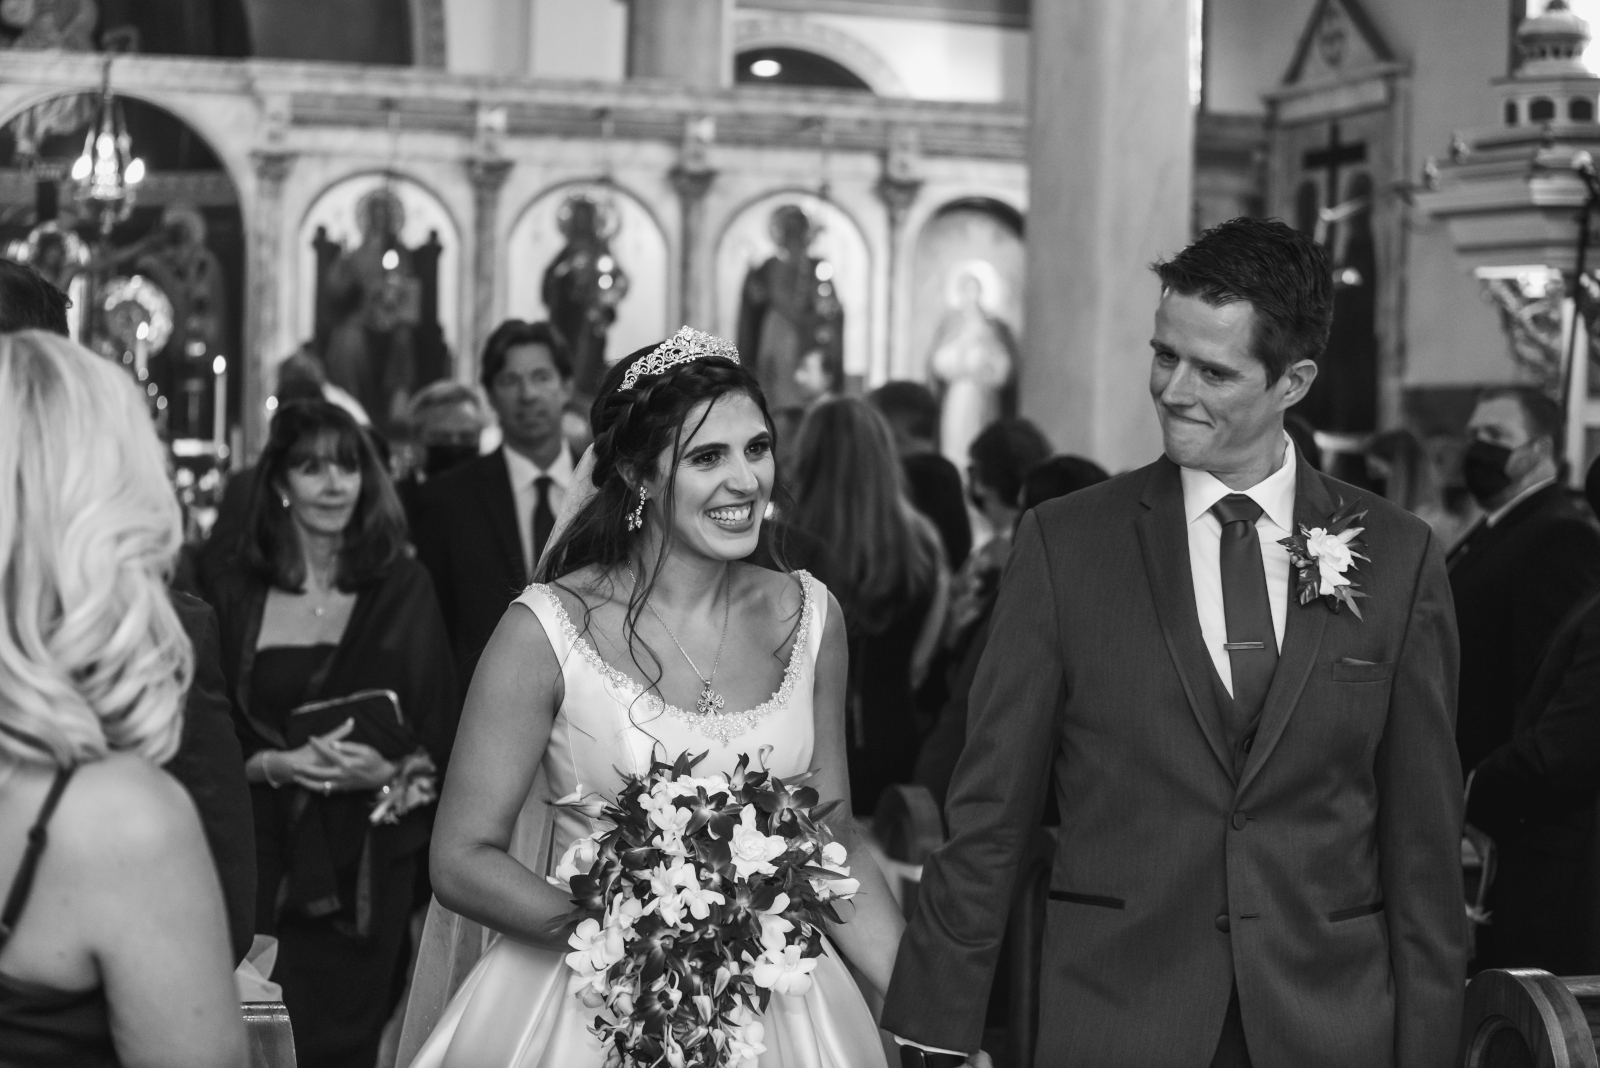 Bride and groom smiling, bridal party processional, classic wedding photo, black and white, Greek Orthodox wedding, church, sweet wedding ceremony at Crocker Park, Westlake OH